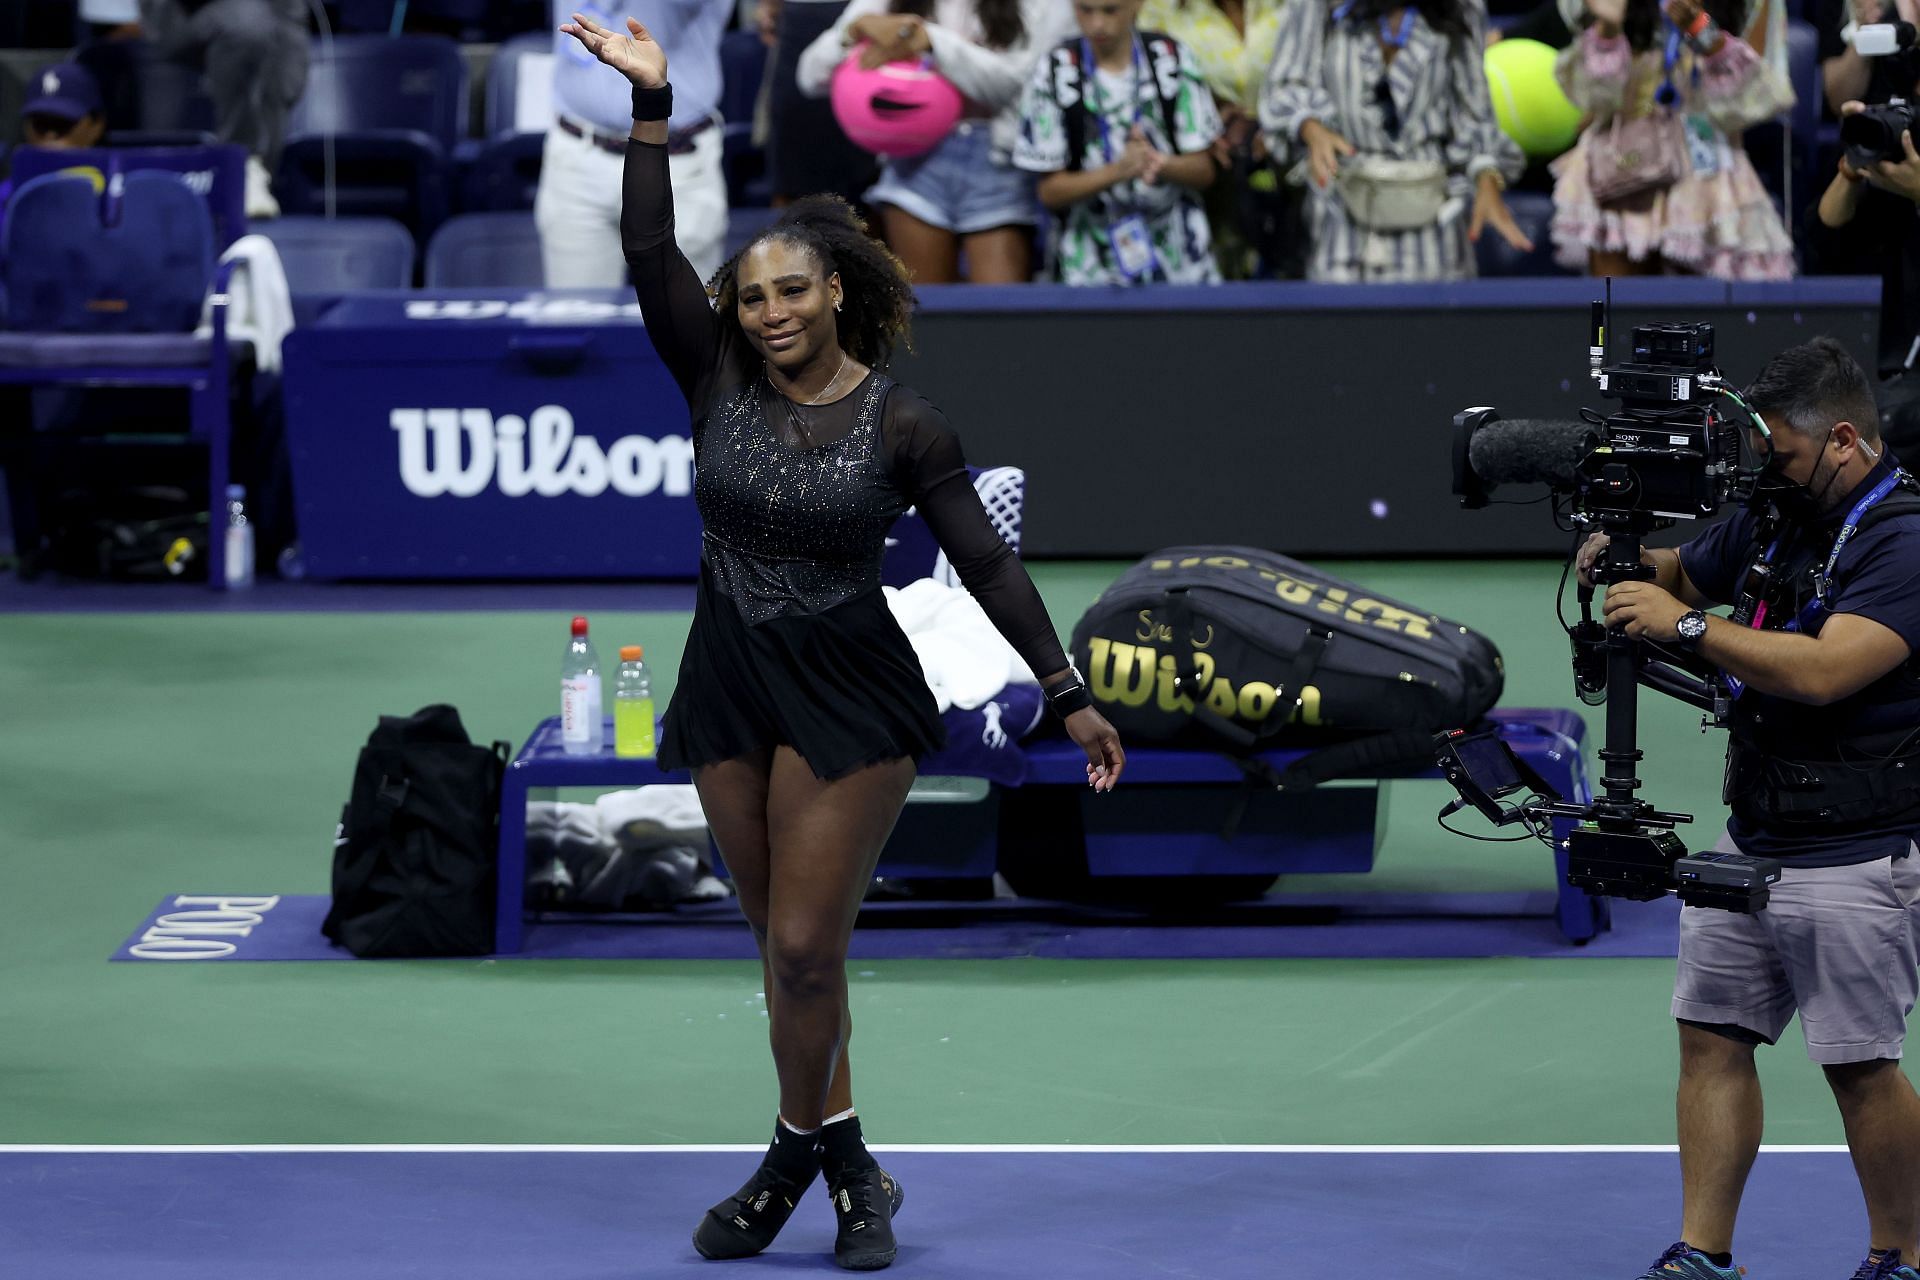 Serena Williams thanks the fans after being defeated by Ajla Tomlijanovic at the 2022 US Open